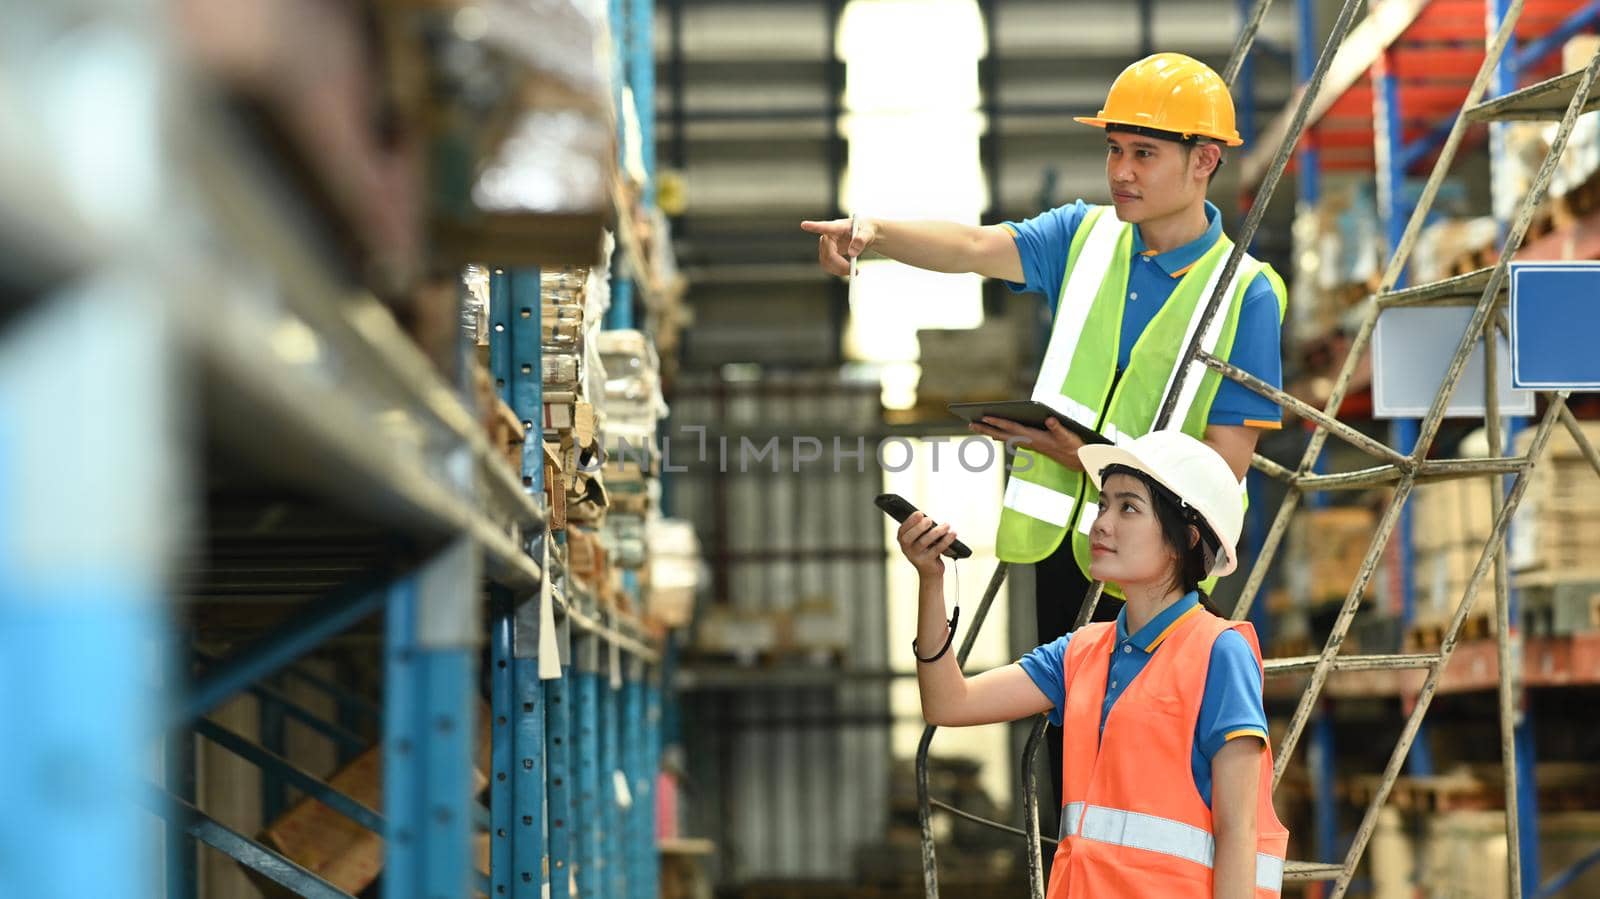 Male and female workers wearing hardhats and reflective jackets checking inventory boxes with barcode scanner in warehouse.